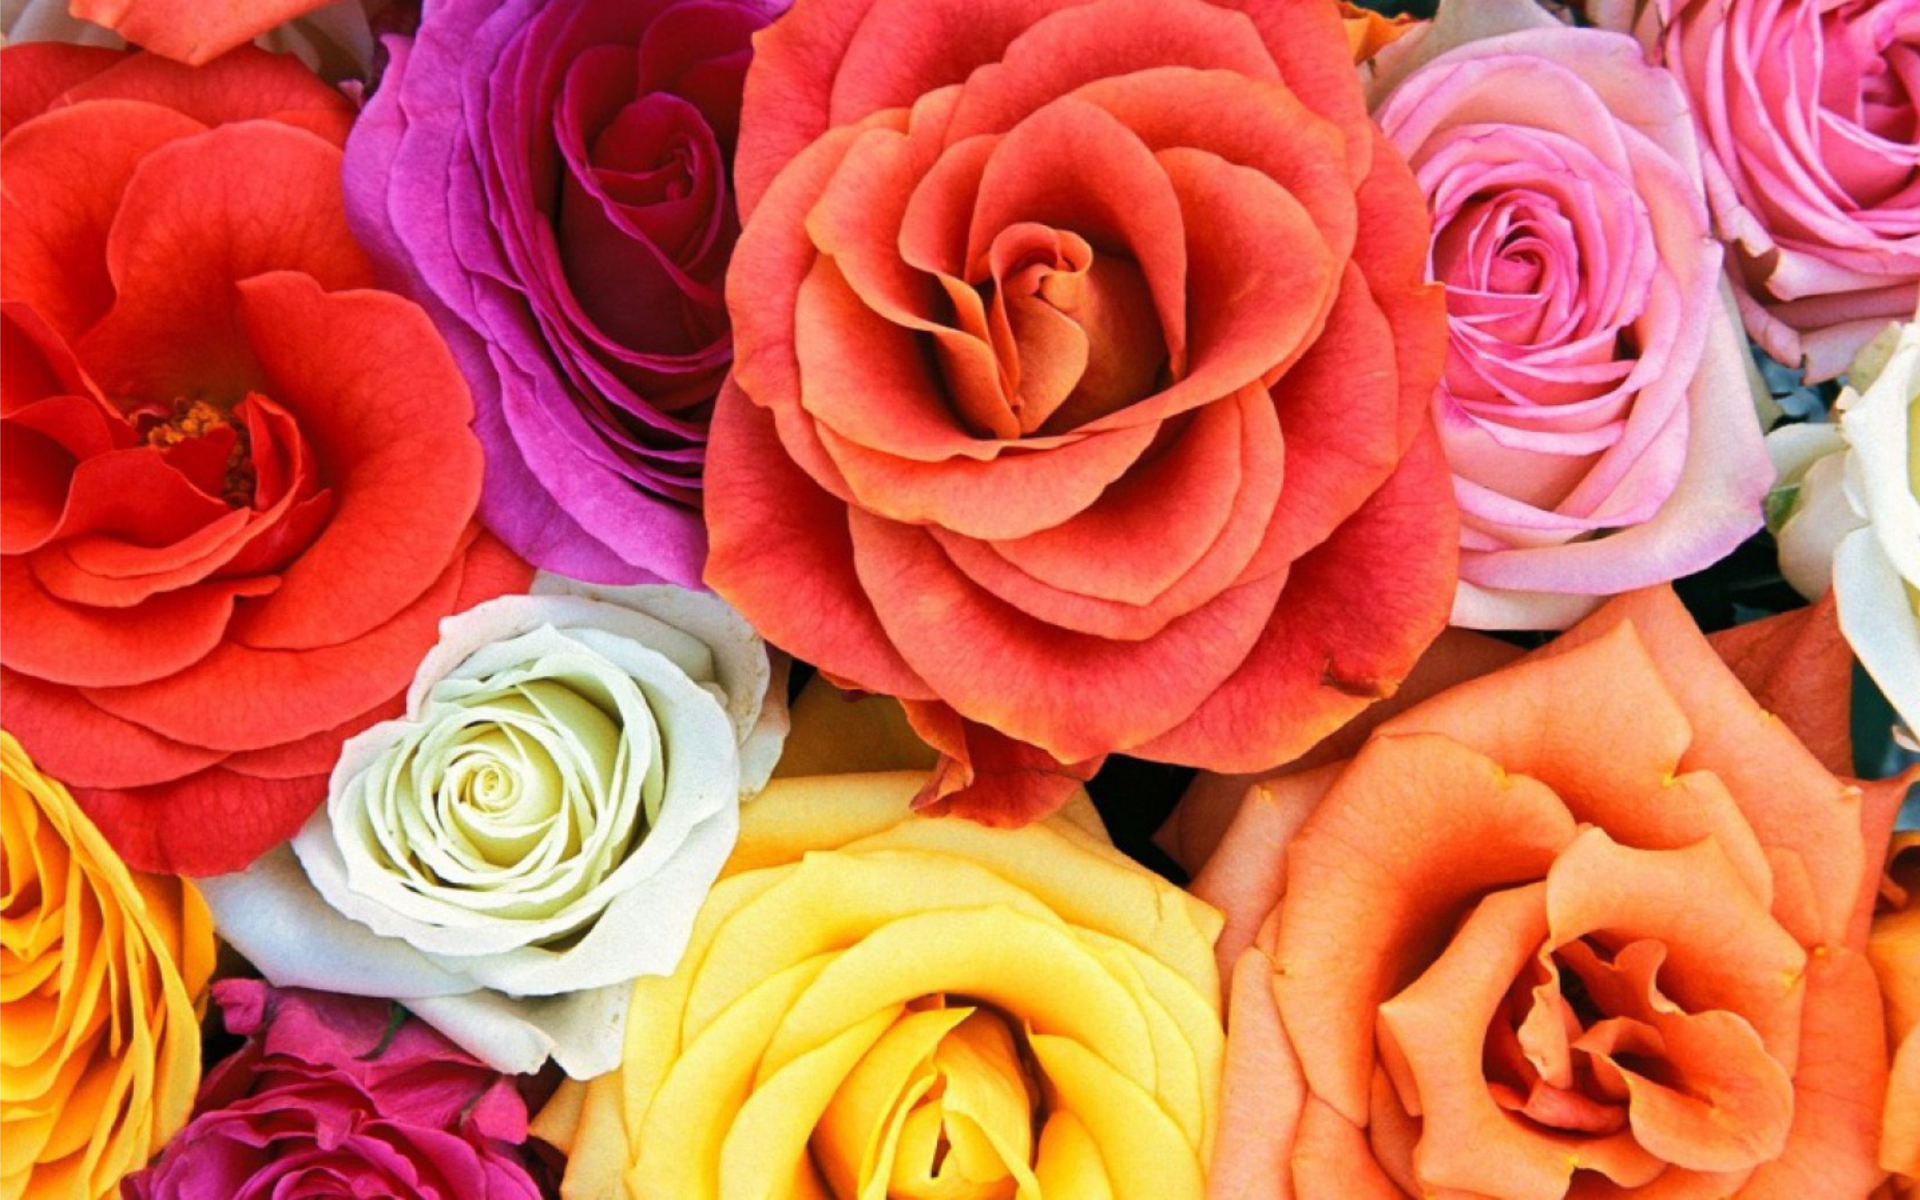 colorful rose backgrounds